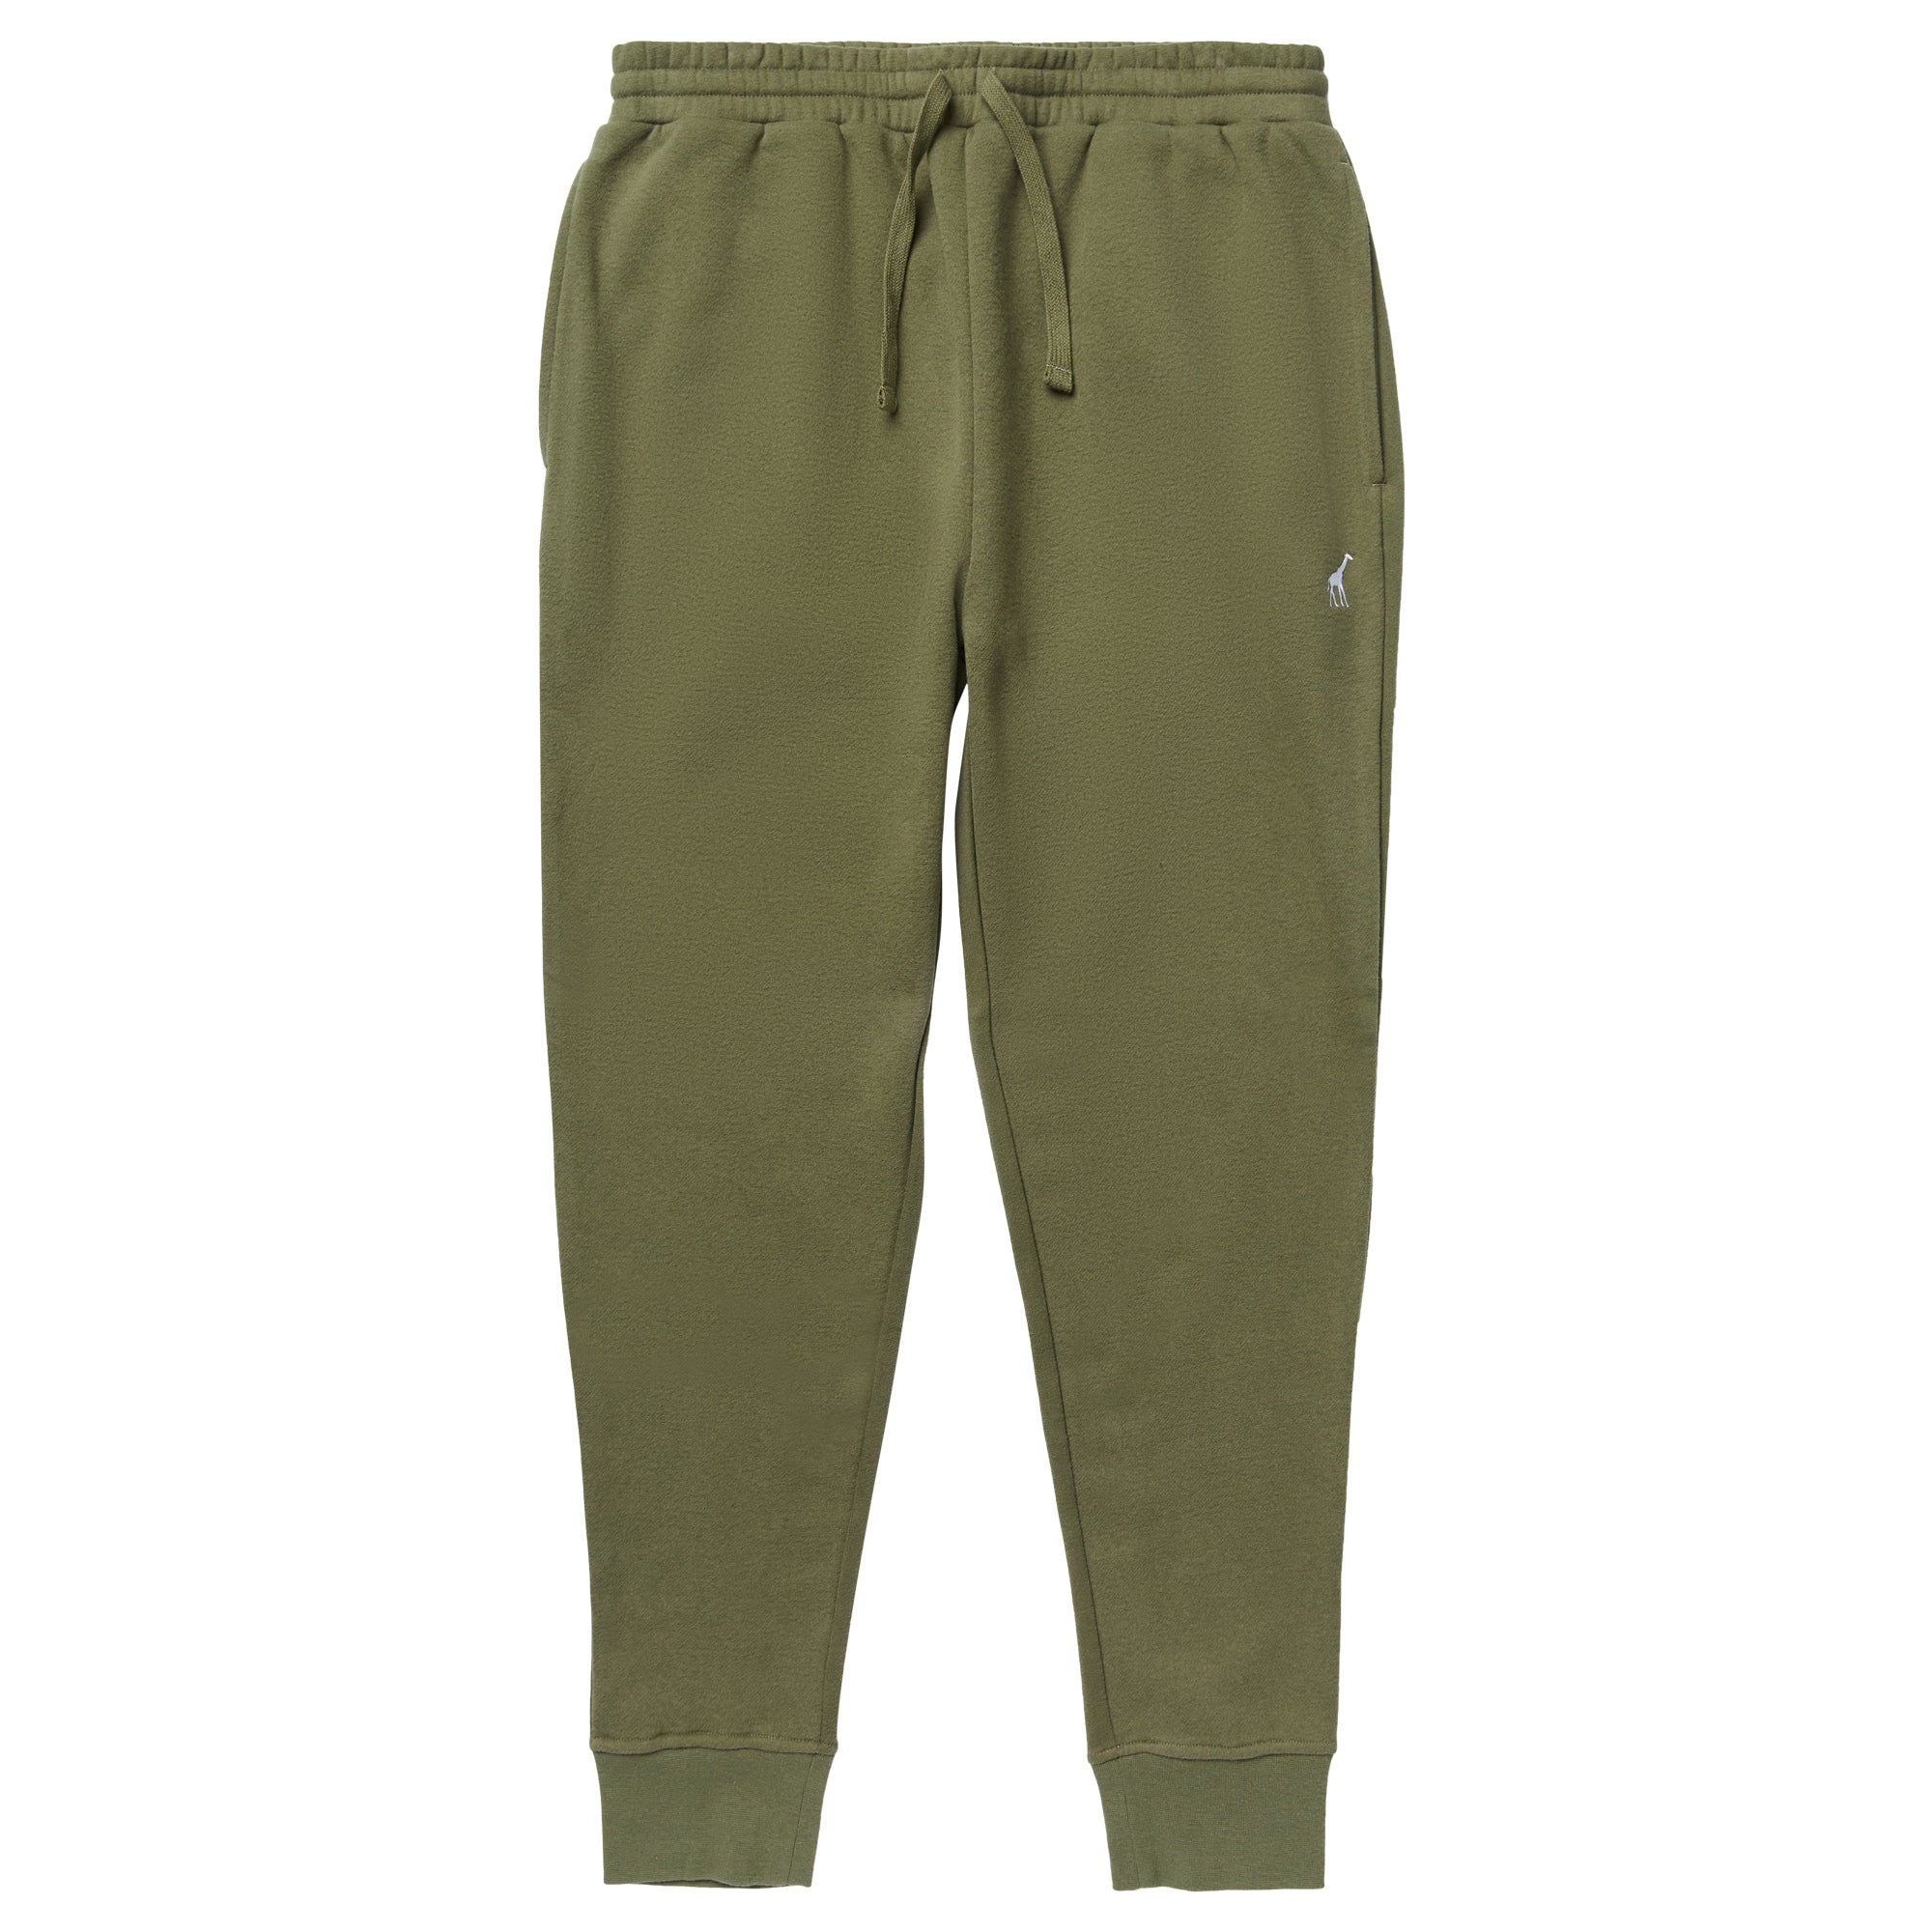 Guess Olive Green Lycocell Jogger Pants Size Large Women's